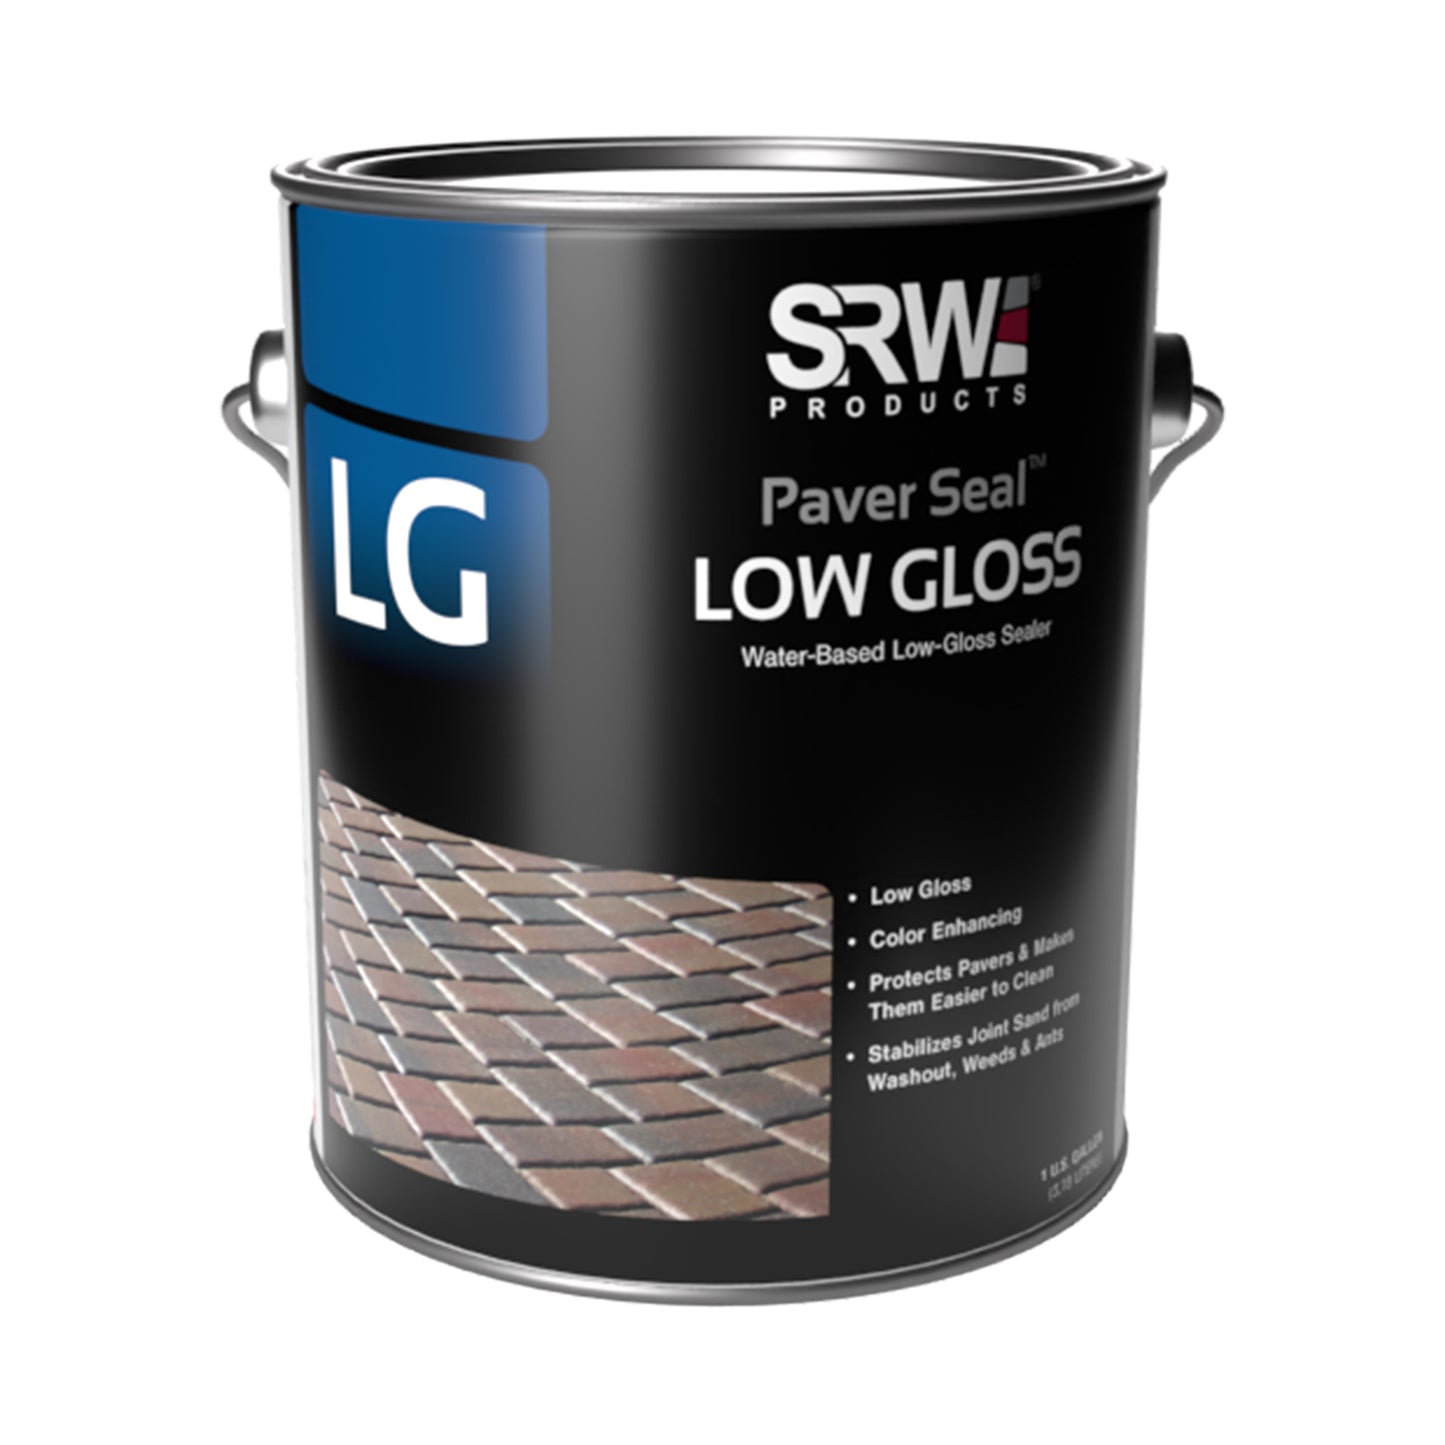 SRW Products LG Low Gloss - Paver Seal™ can